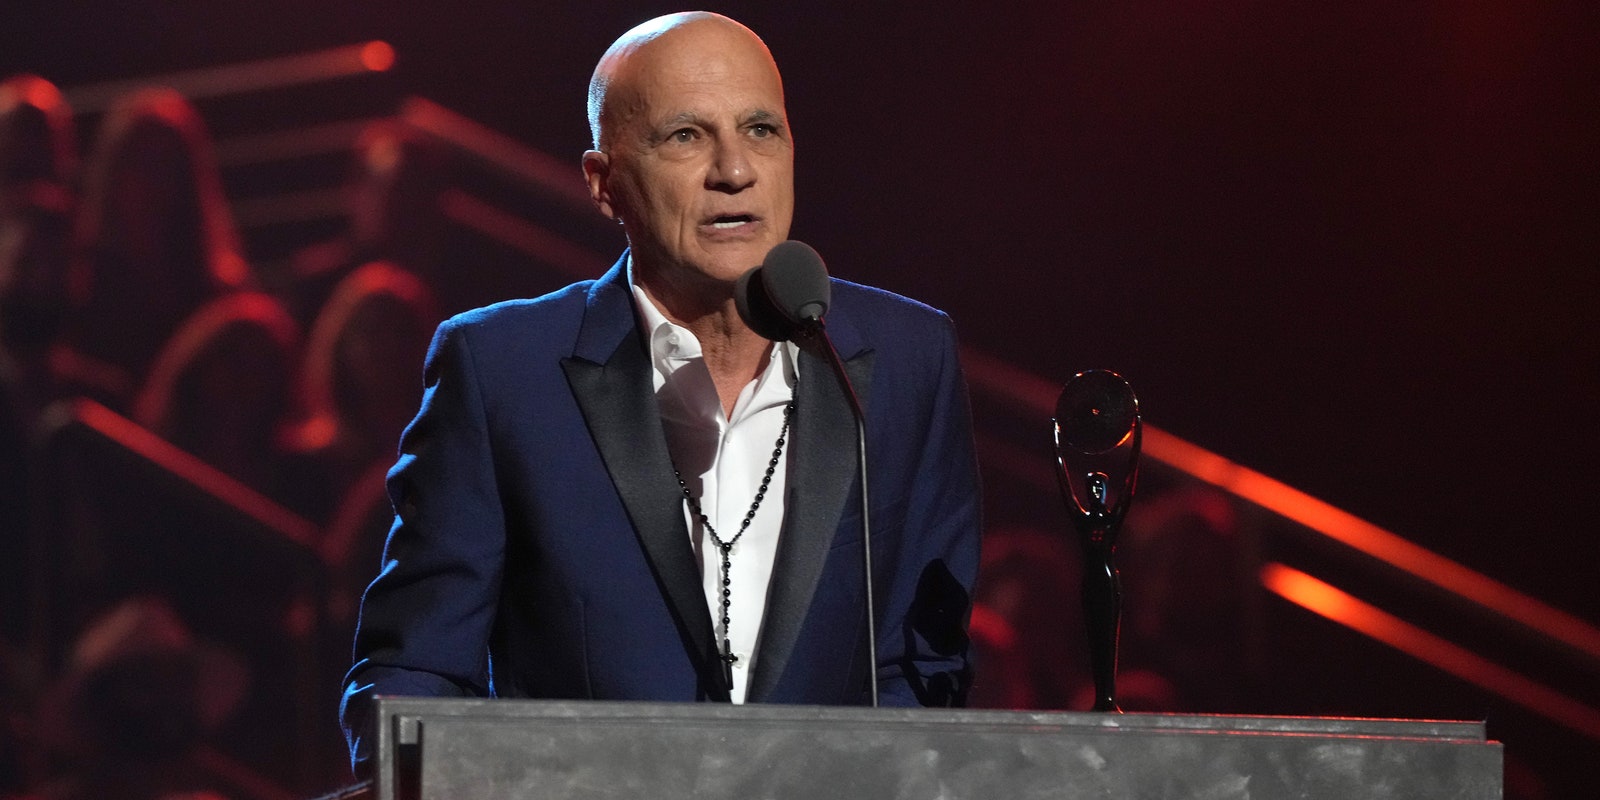 Interscope Co-Founder Jimmy Iovine Facing Lawsuit Over Alleged Sexual Abuse